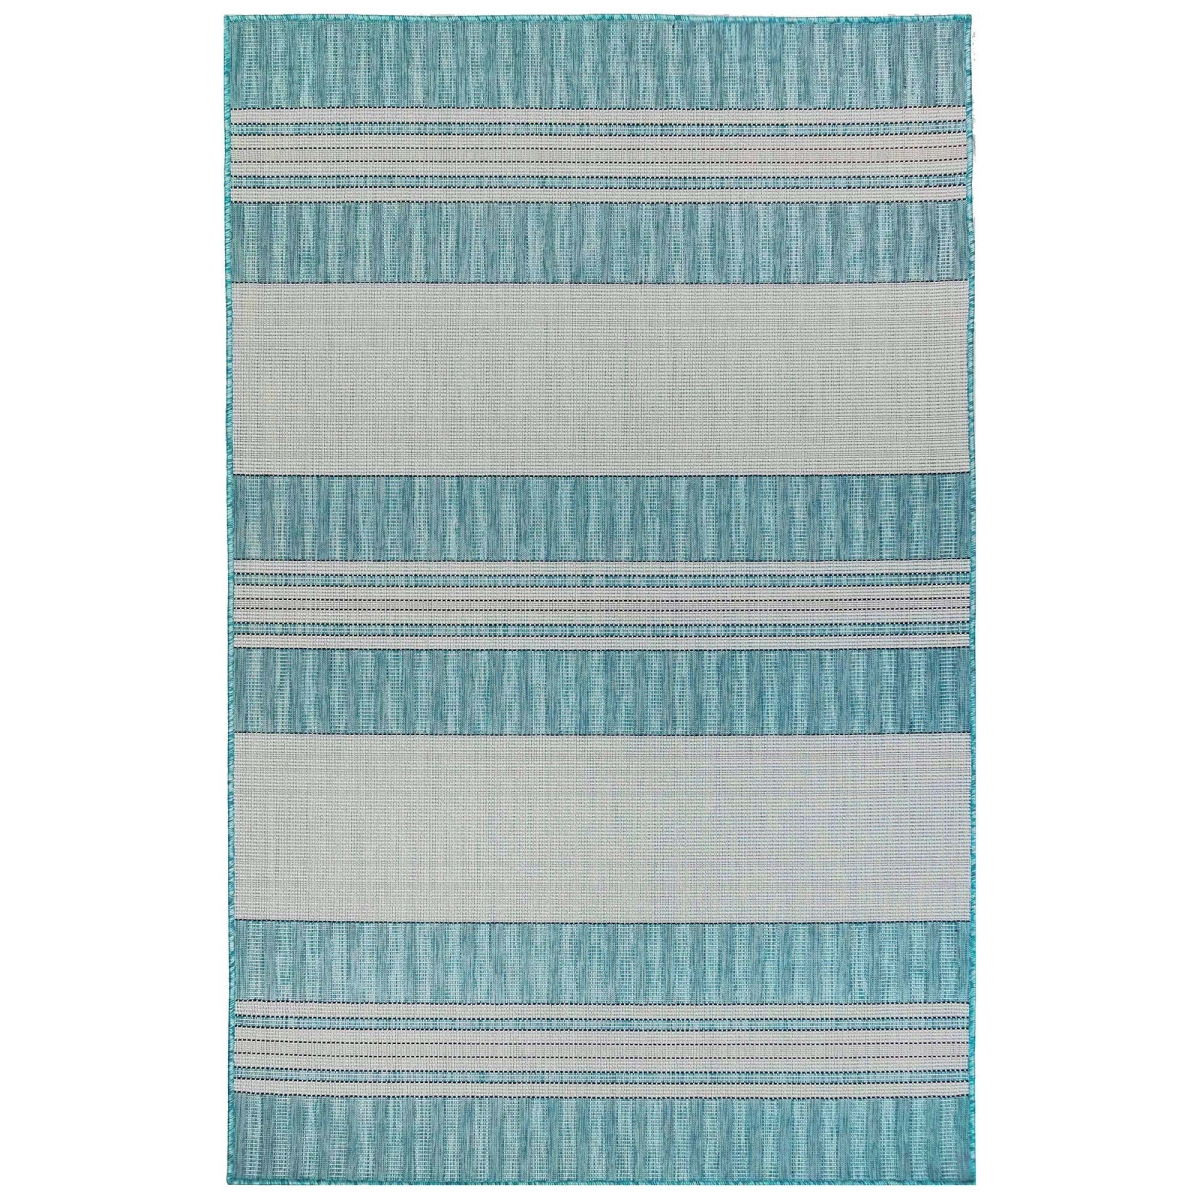 Trans-ocean Imports Cre58843504 4 Ft. 10 In. X 7 Ft. 6 In. Liora Manne Carmel Stripe Indoor & Outdoor Wilton Woven Rectangle Rug - Aqua